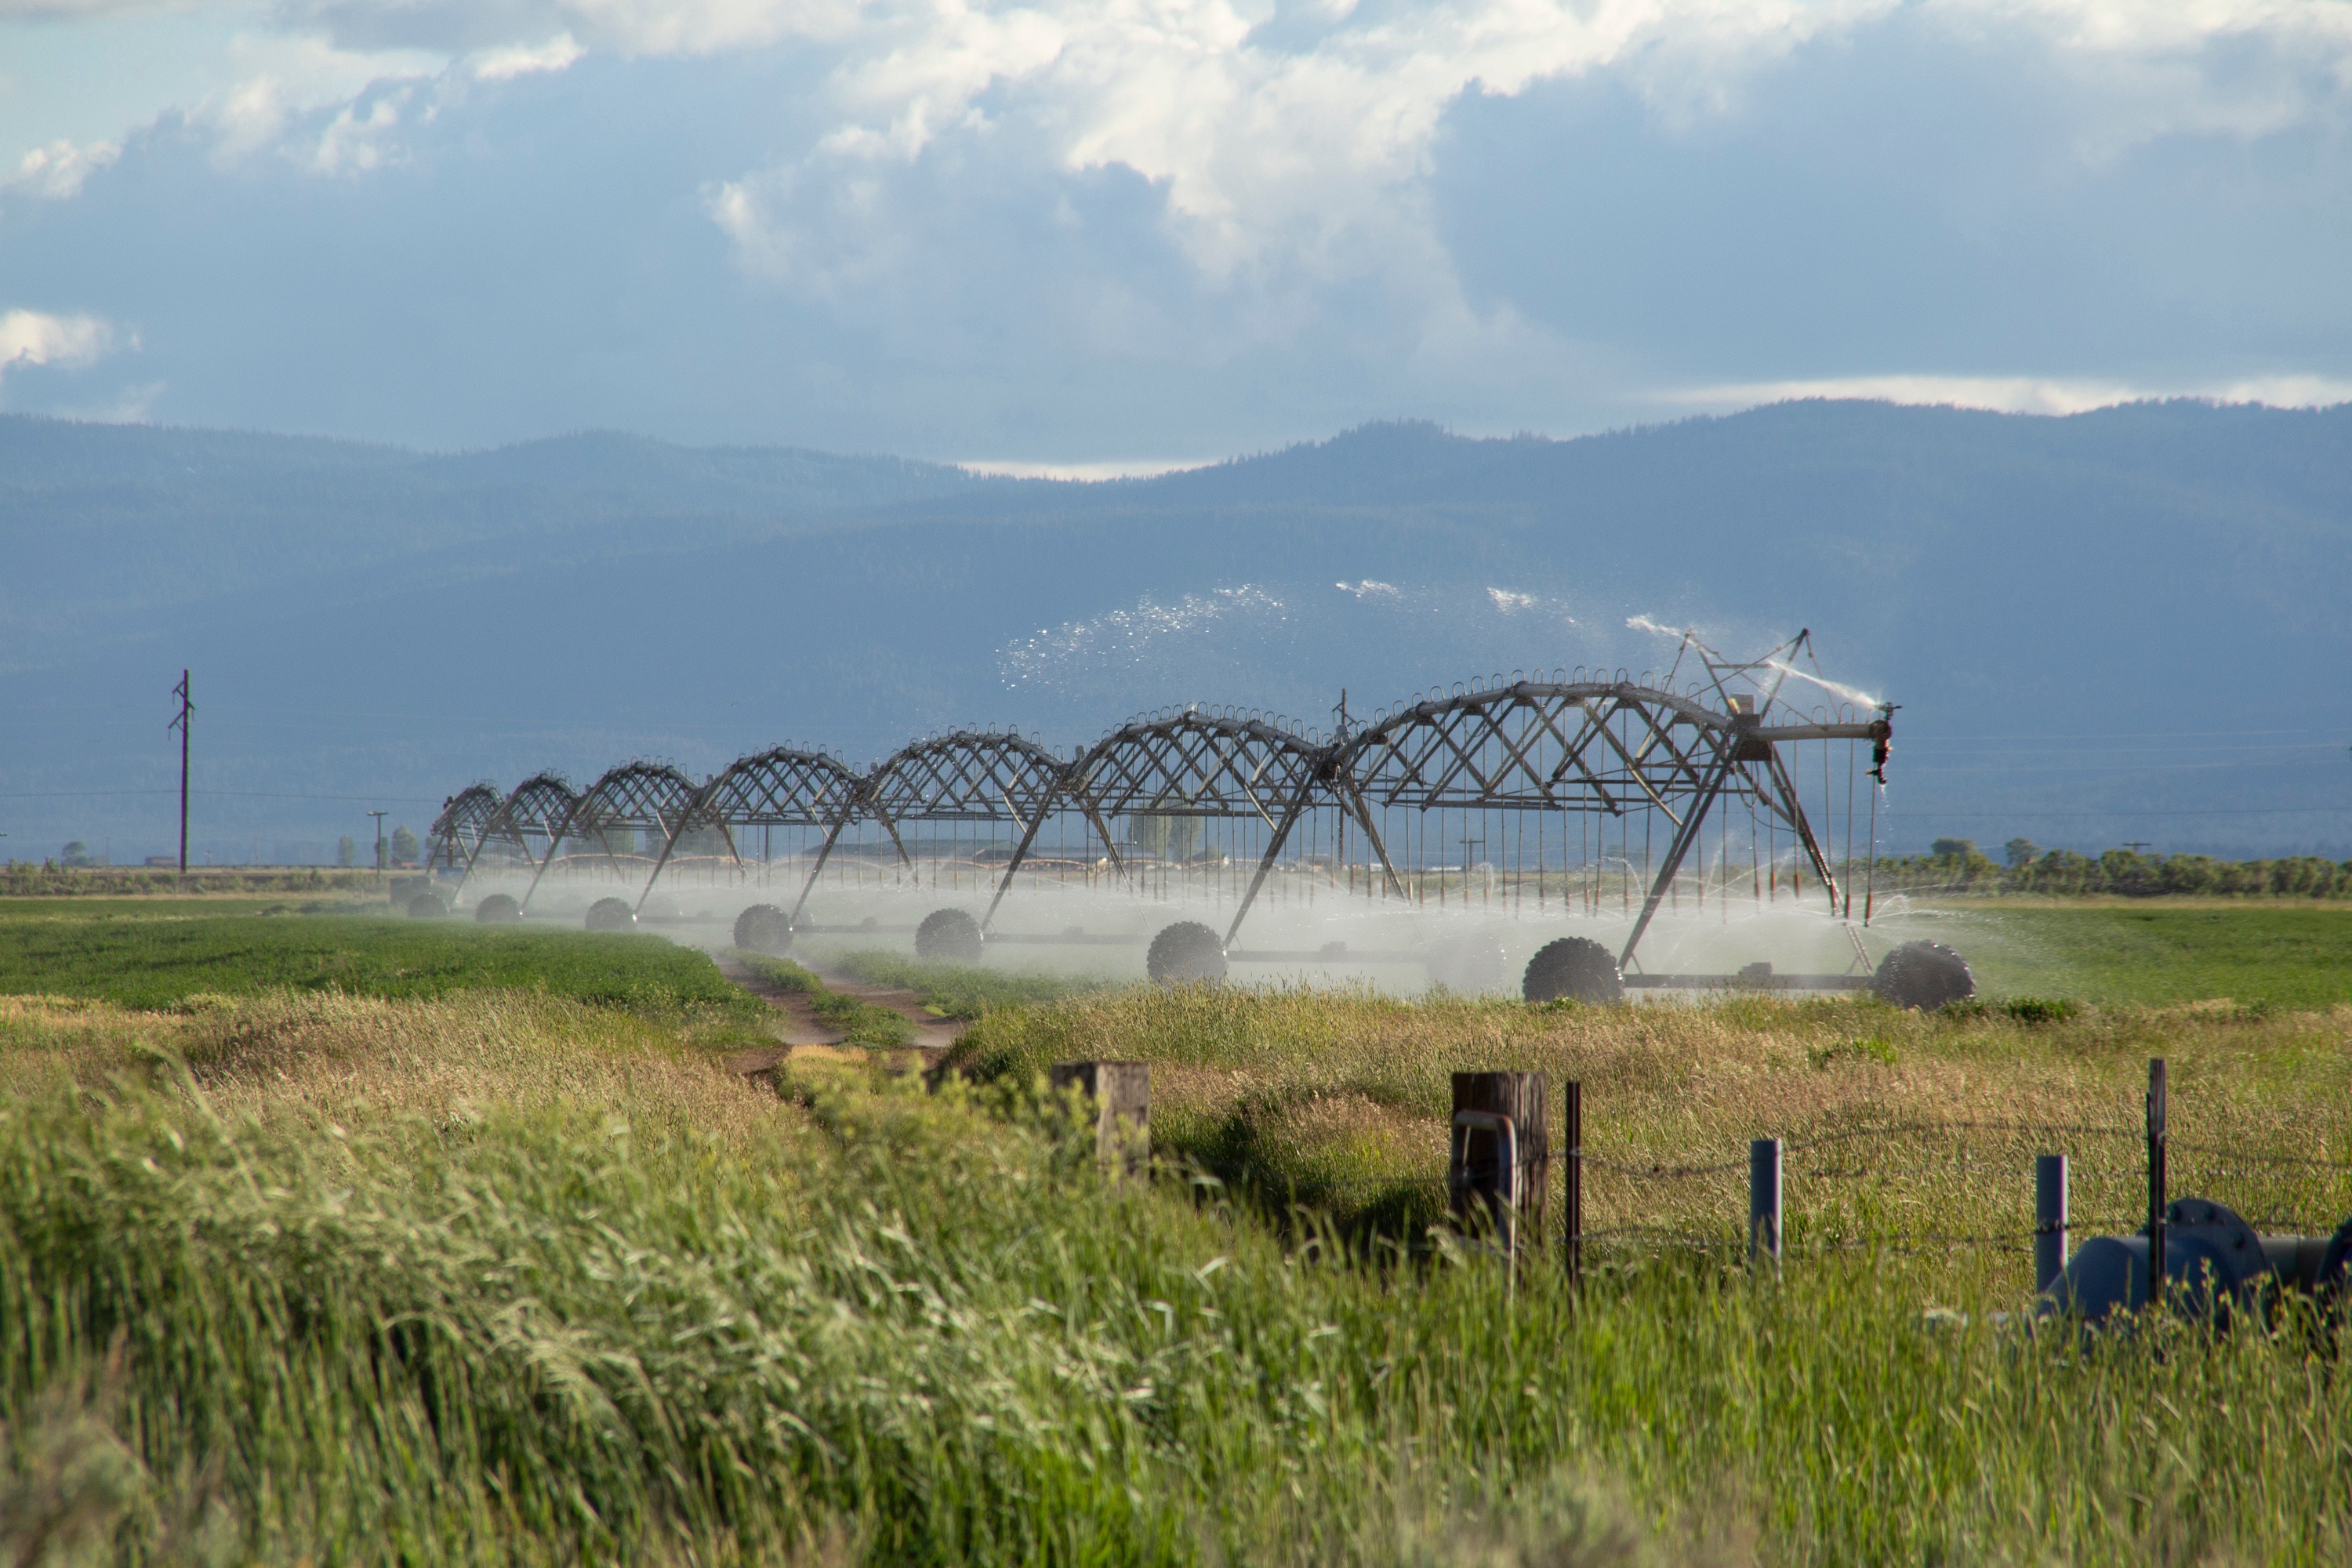 Image of irrigation in a crop field